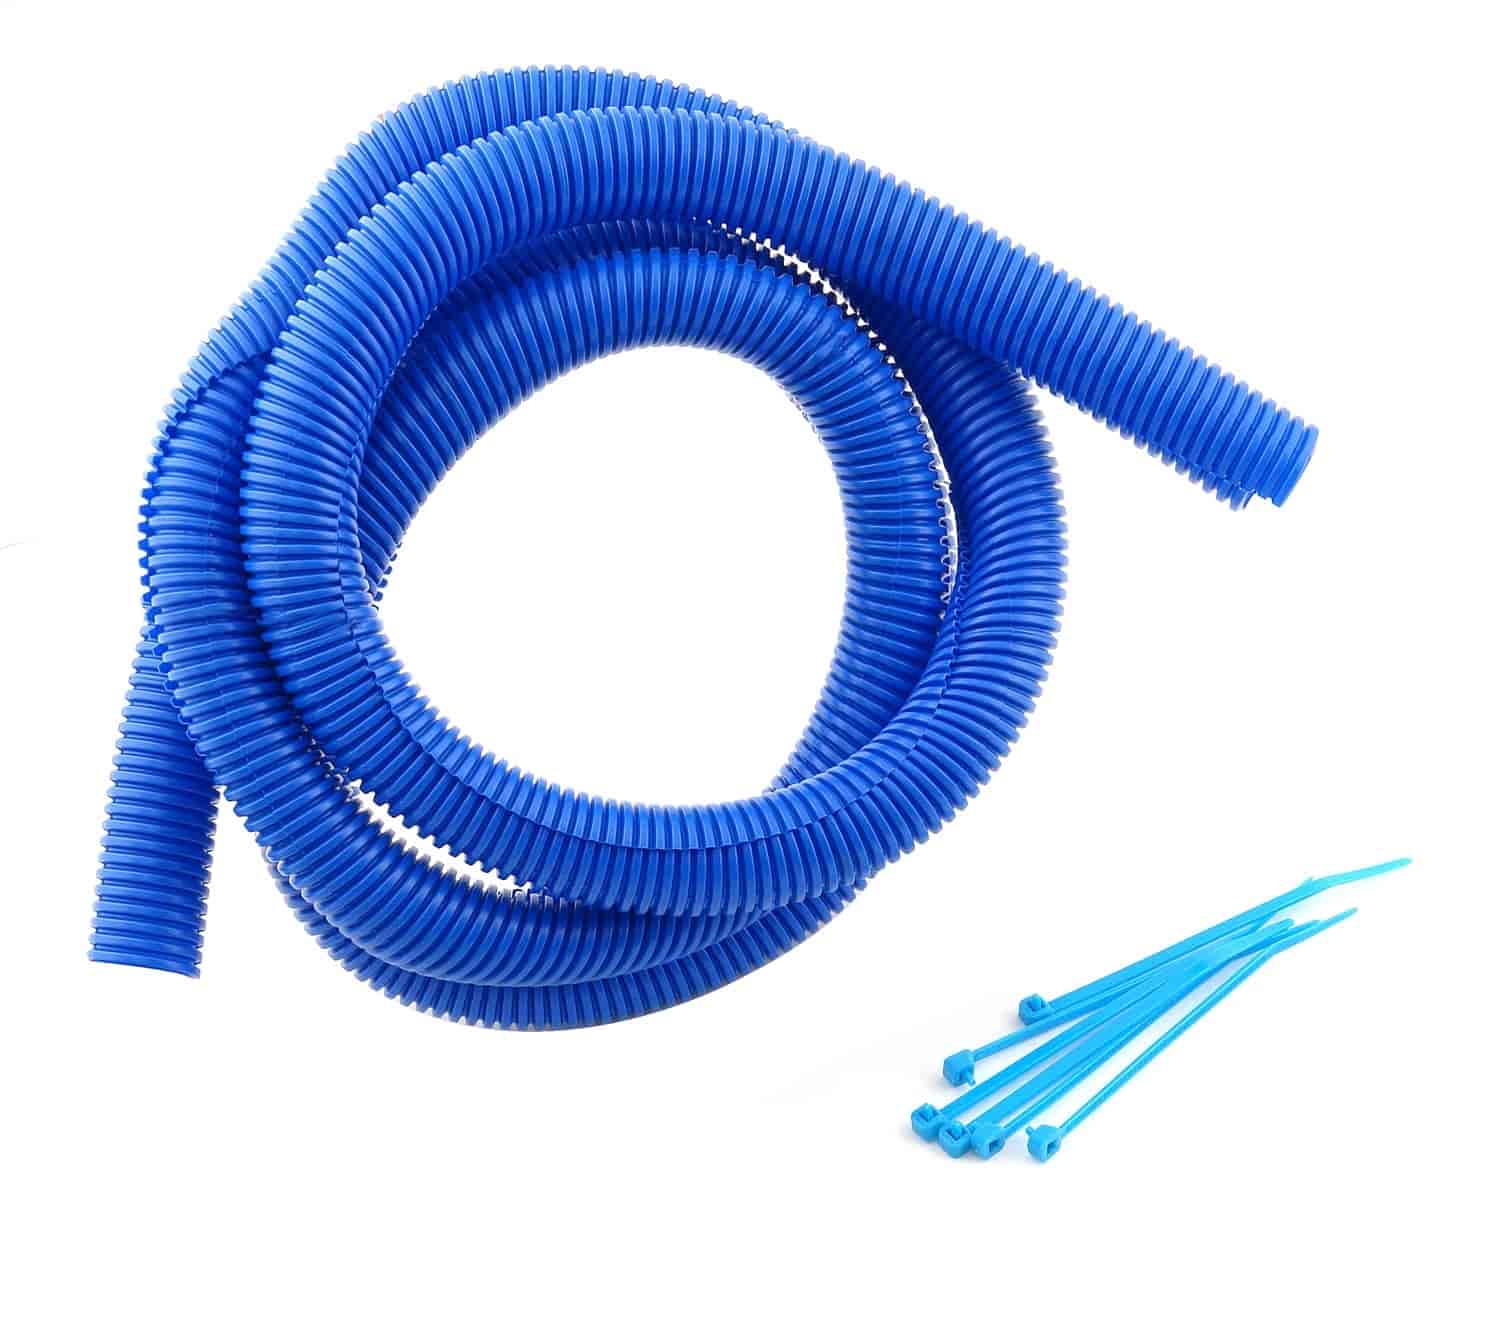 Convoluted Tubing with Tie Straps Blue